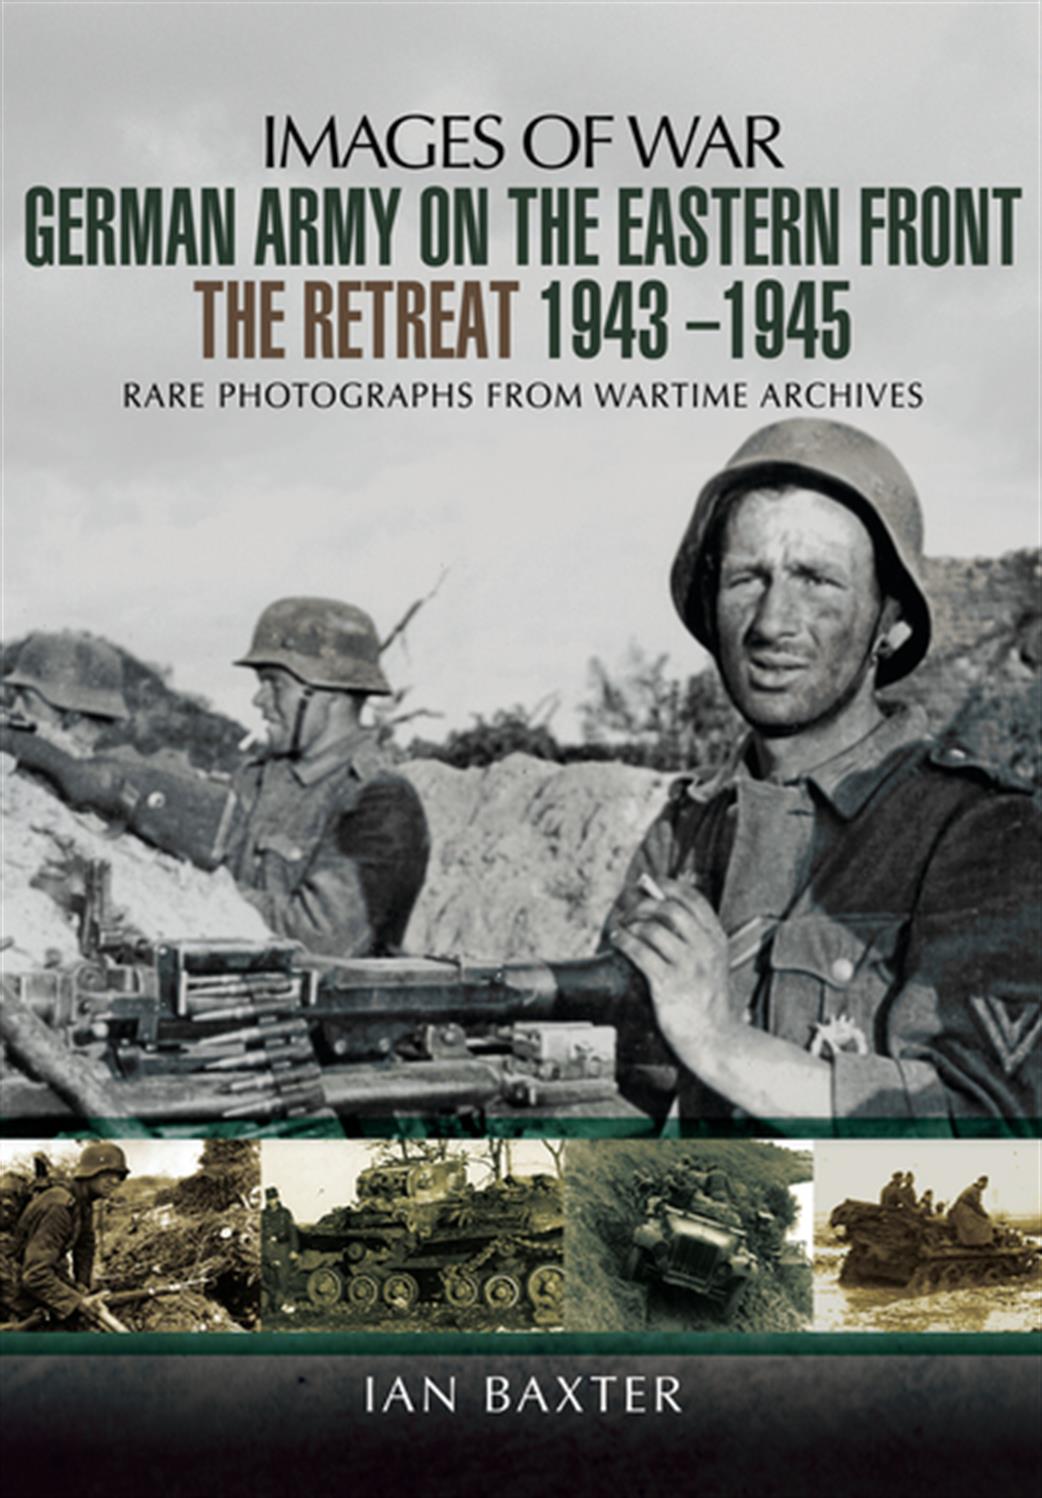 Pen & Sword  9781473822672 Images of War German Army on the Eastern Front The Retreat 1943 - 1945